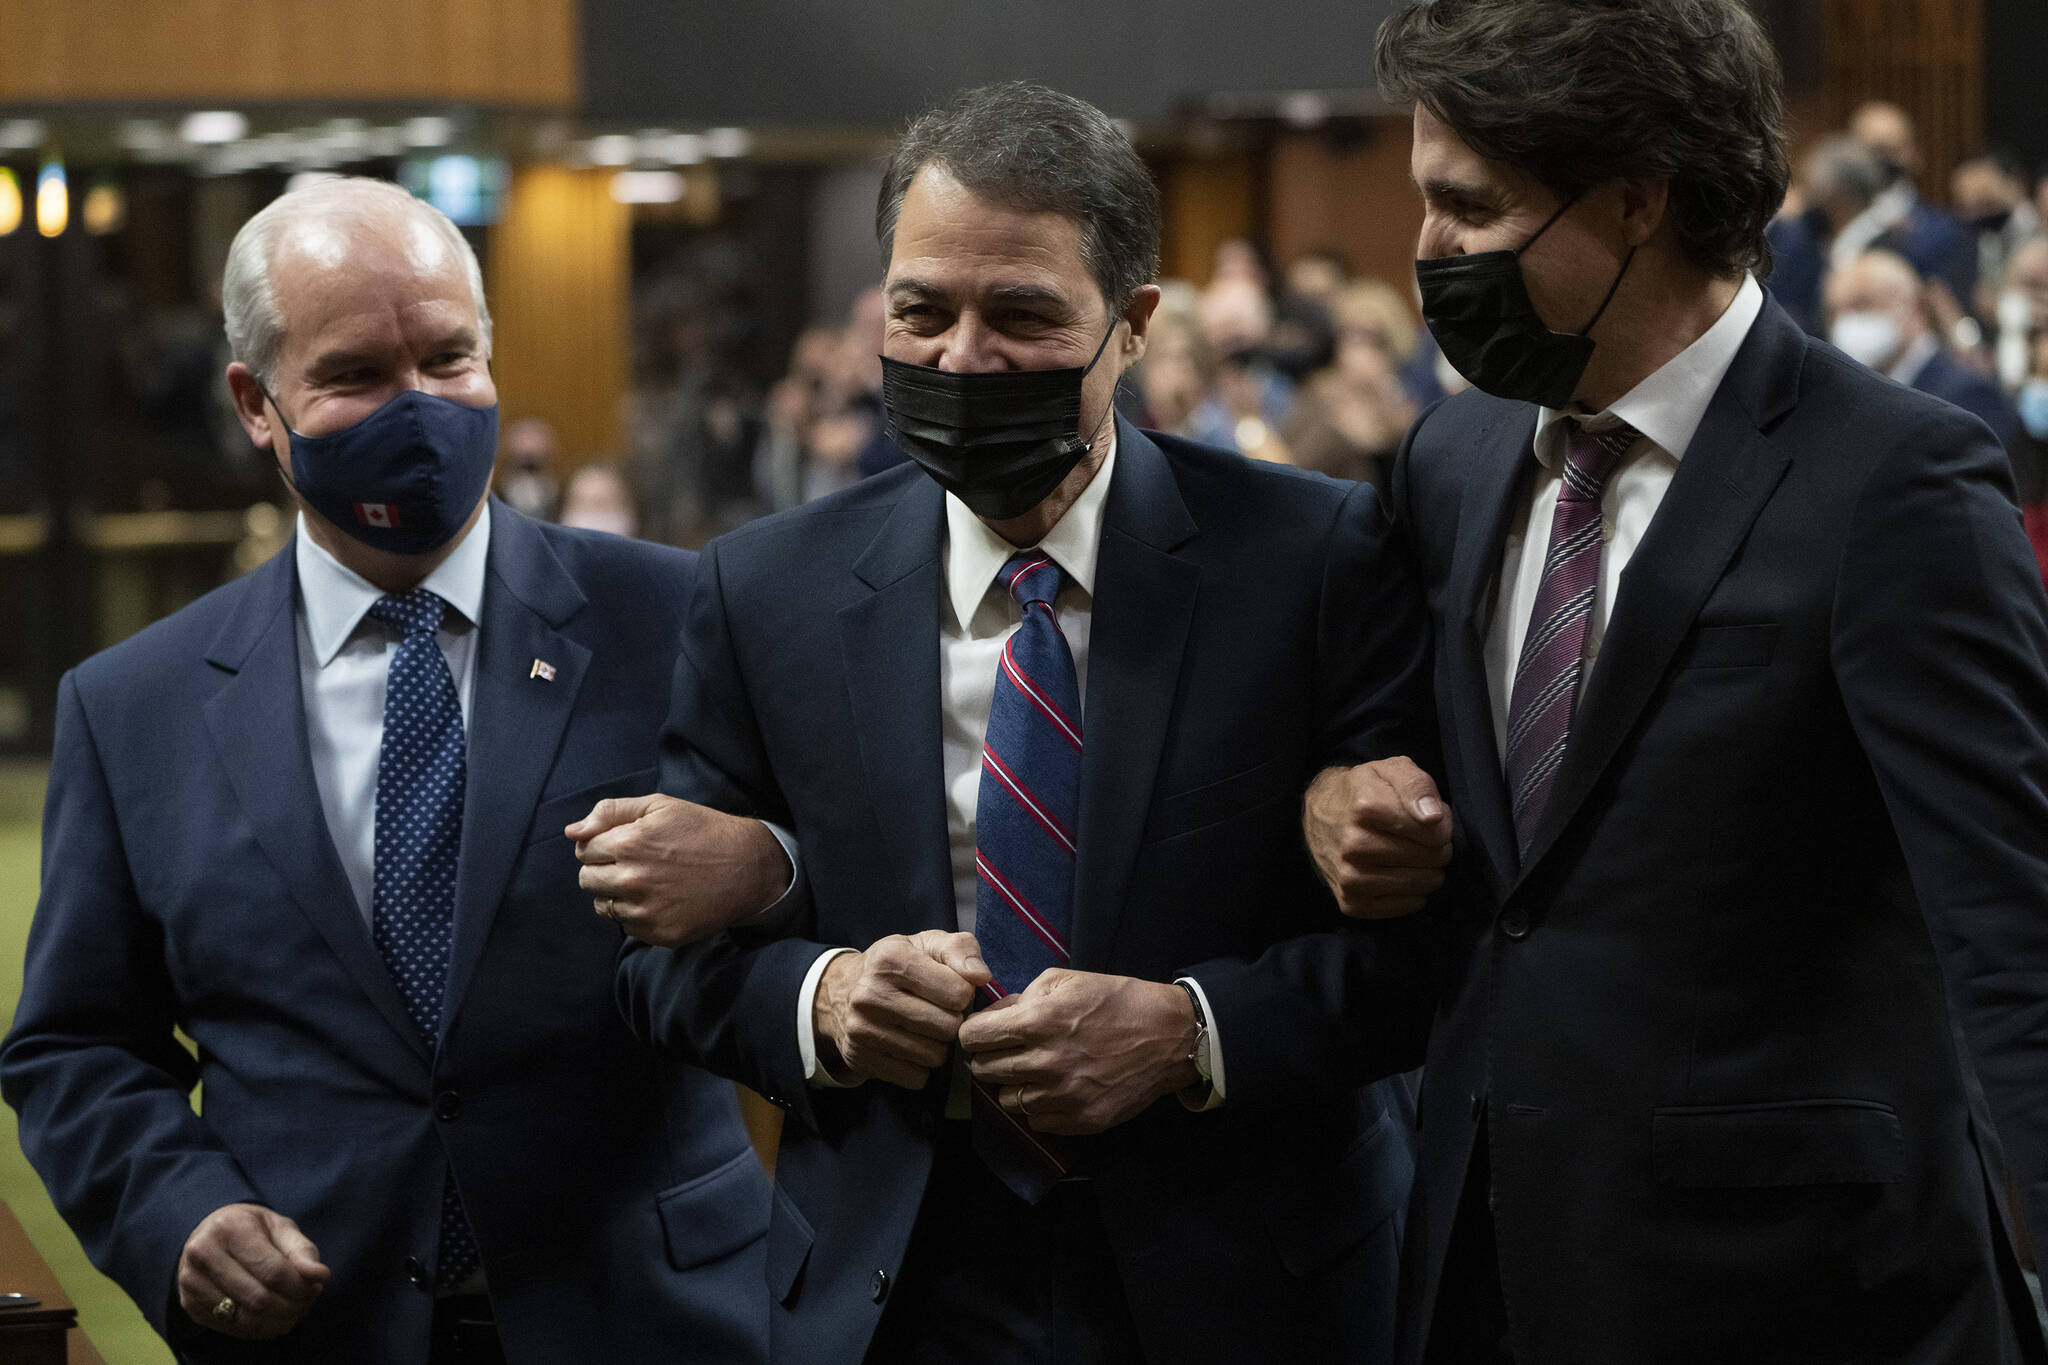 Anthony Rota is escorted by Prime Minister Justin Trudeau and Conservative leader Erin O’Toole to the Speakers chair after being elected as the Speaker of the House of Commons Monday, November 22, 2021 in Ottawa. THE CANADIAN PRESS/Adrian Wyld